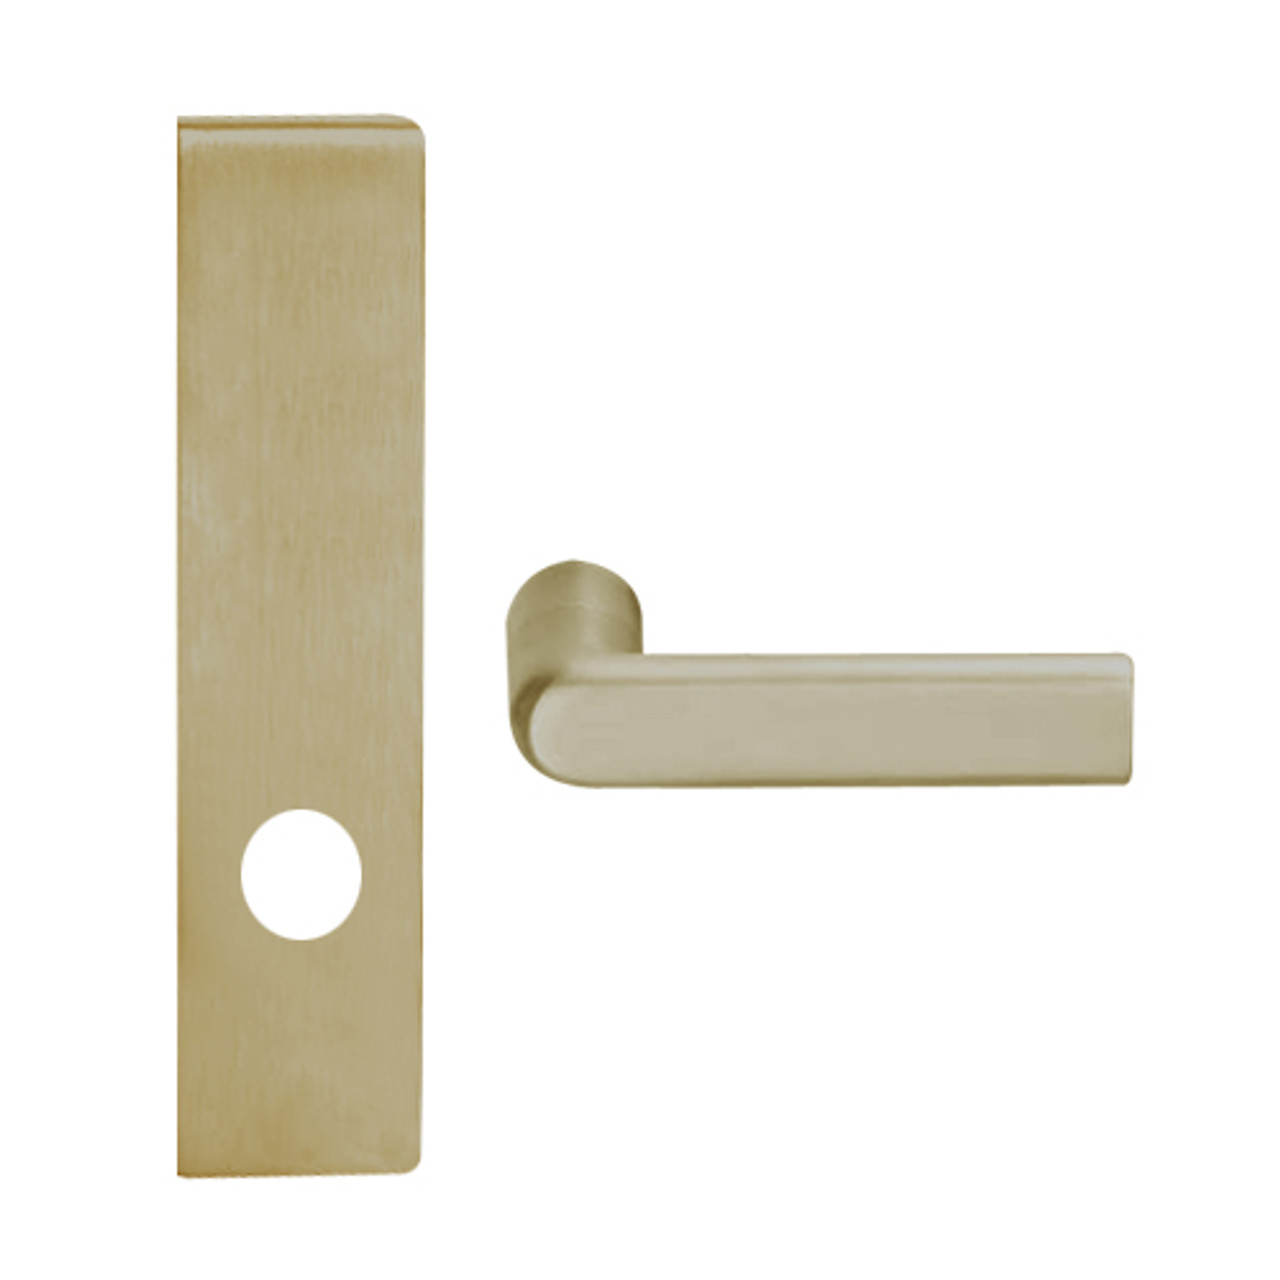 L0172-01L-613 Schlage L Series Double Dummy Trim Commercial Mortise Lock with 01 Cast Lever Design in Oil Rubbed Bronze